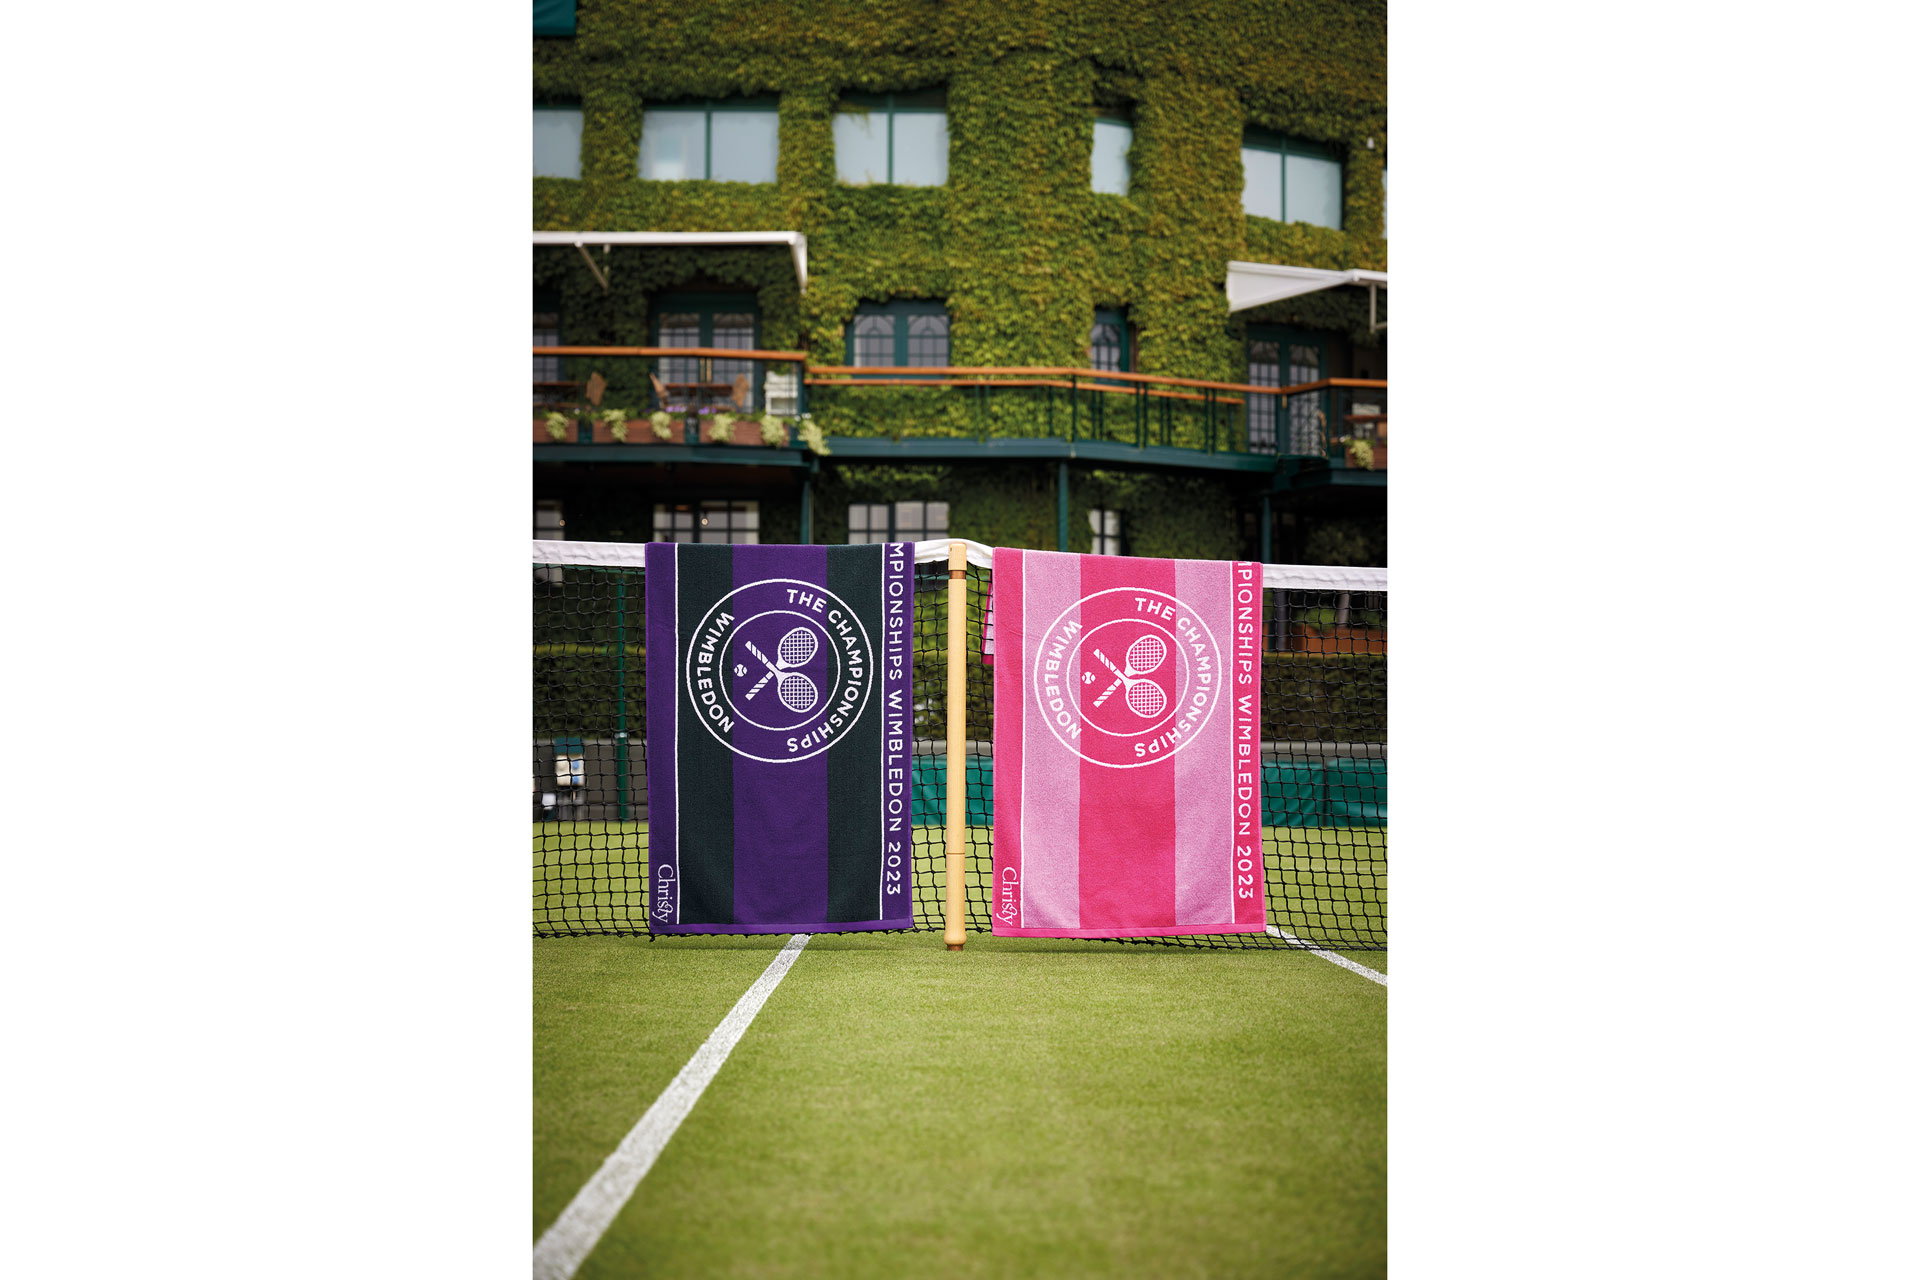 Two Christy towels on the pitch at Wimbledon